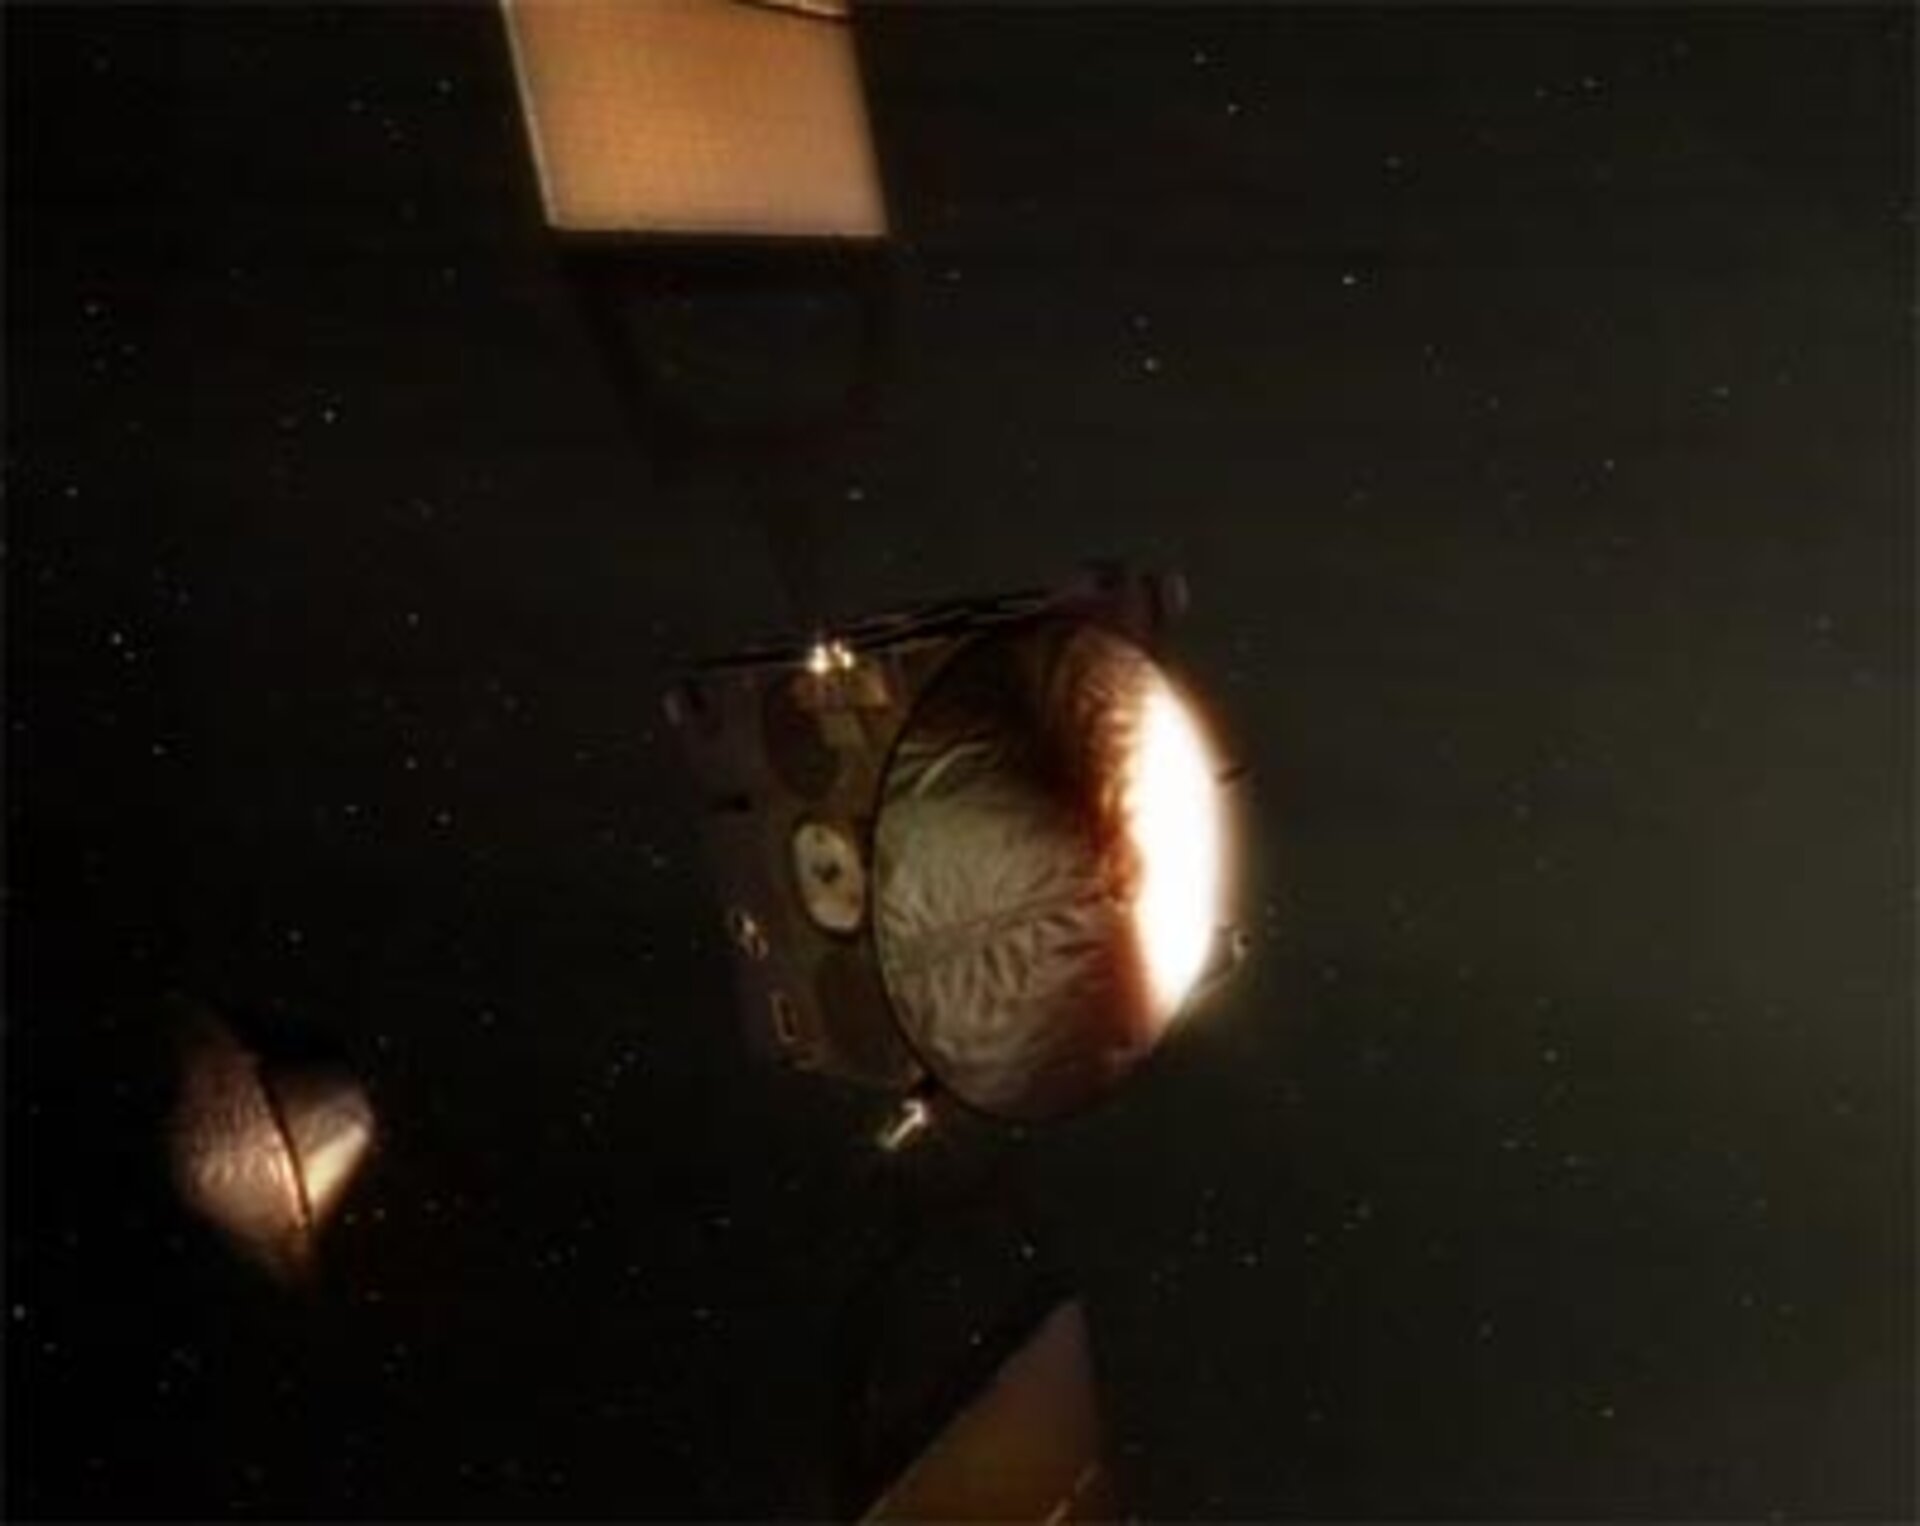 Beagle 2 has separated from the Mars Express orbiter.